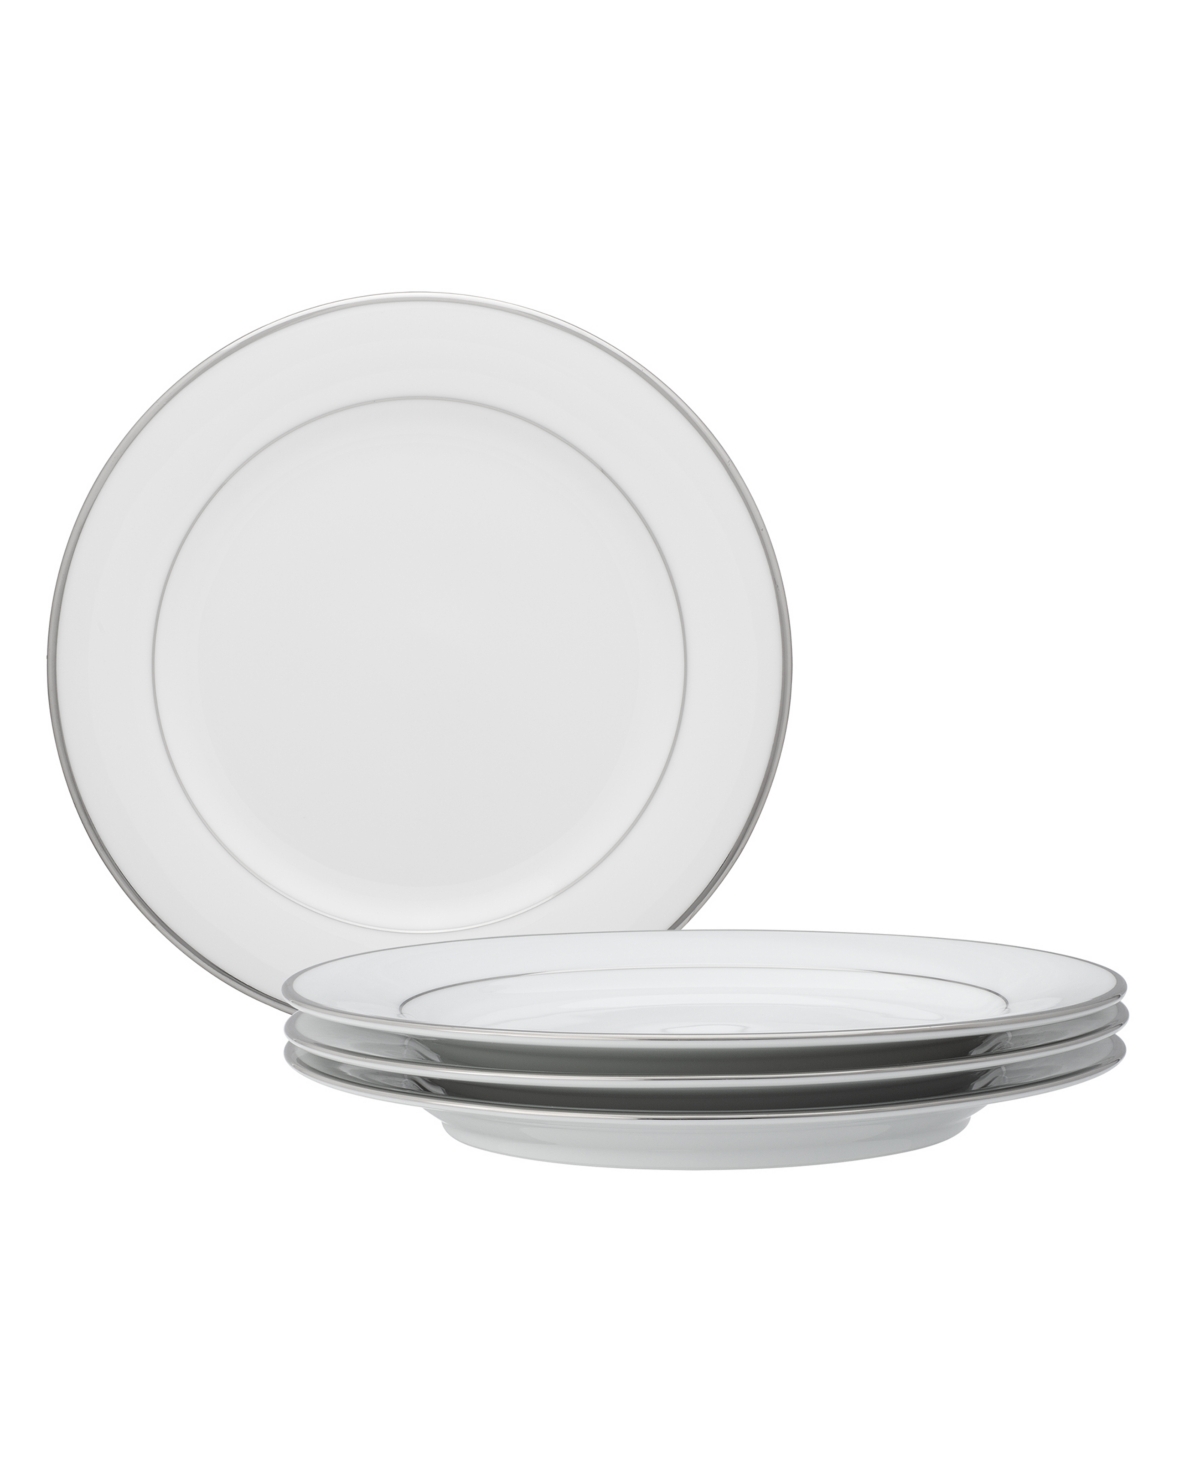 Noritake Spectrum Set Of 4 Salad Plates, Service For 4 In White